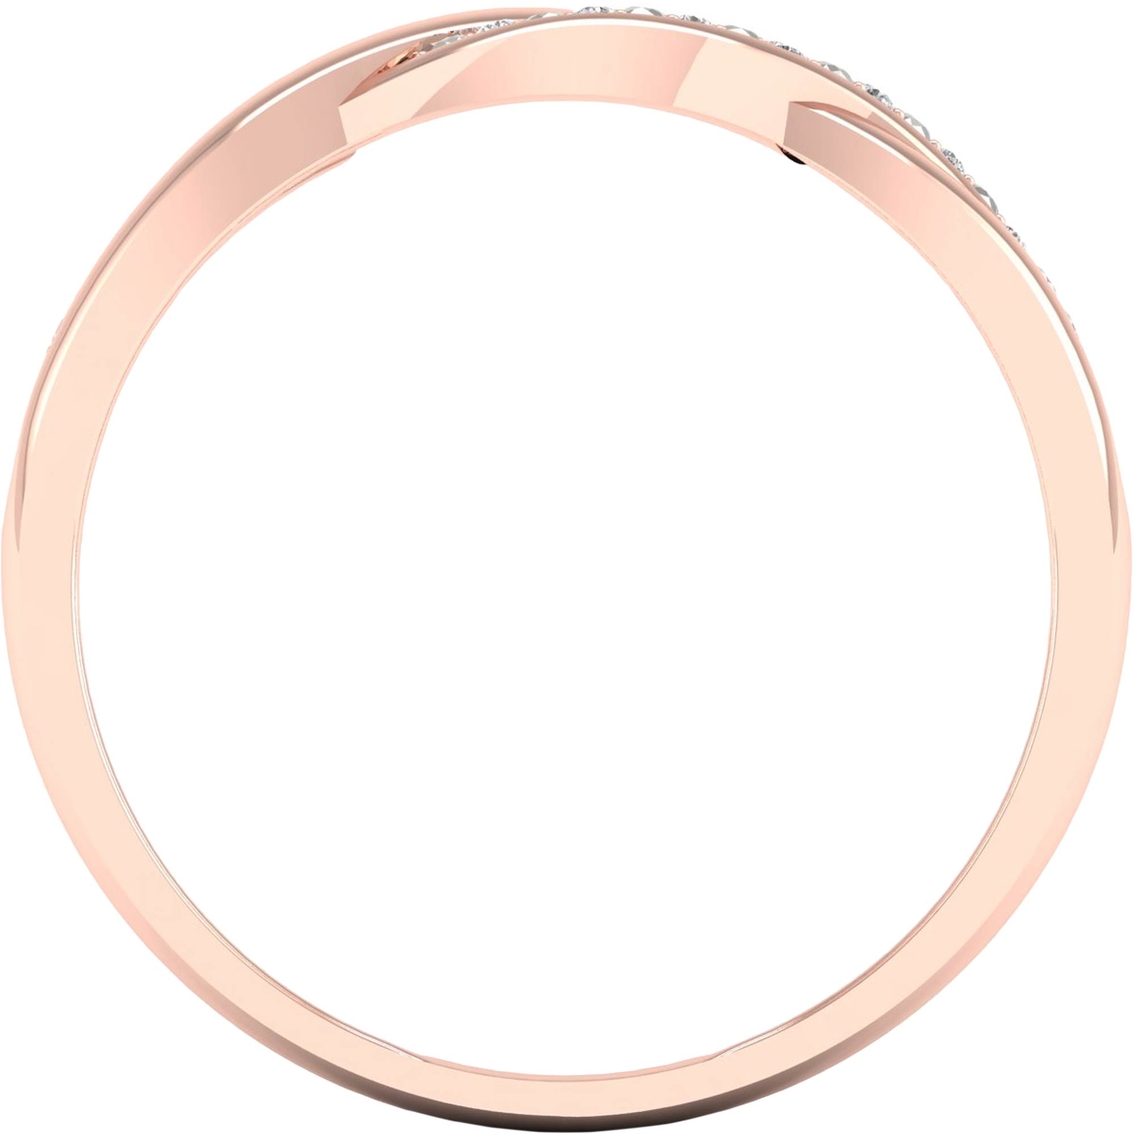 14K Rose Gold Over Sterling Silver Diamond Accent Band - Image 4 of 4